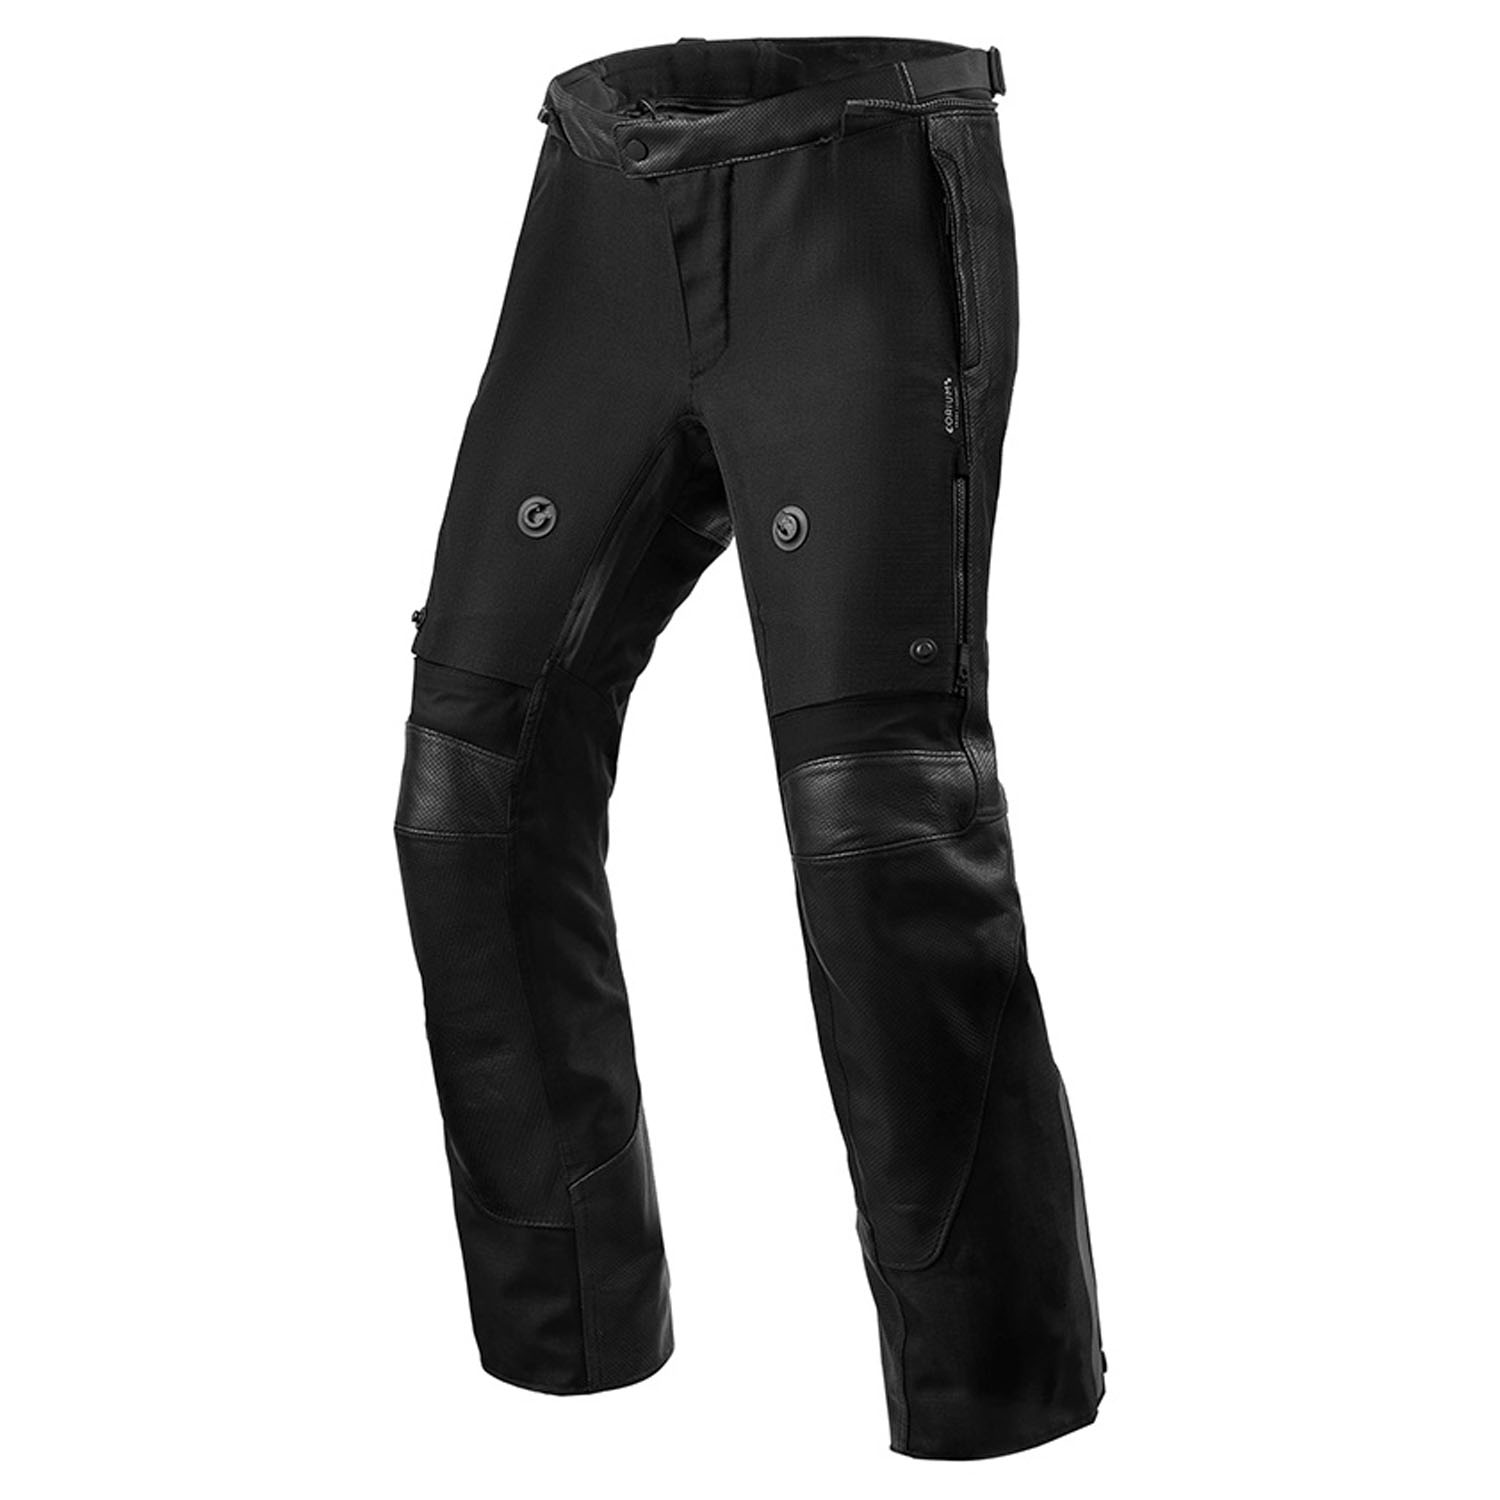 Image of REV'IT! Trousers Valve H2O Black Short Motorcycle Pants Taille 56